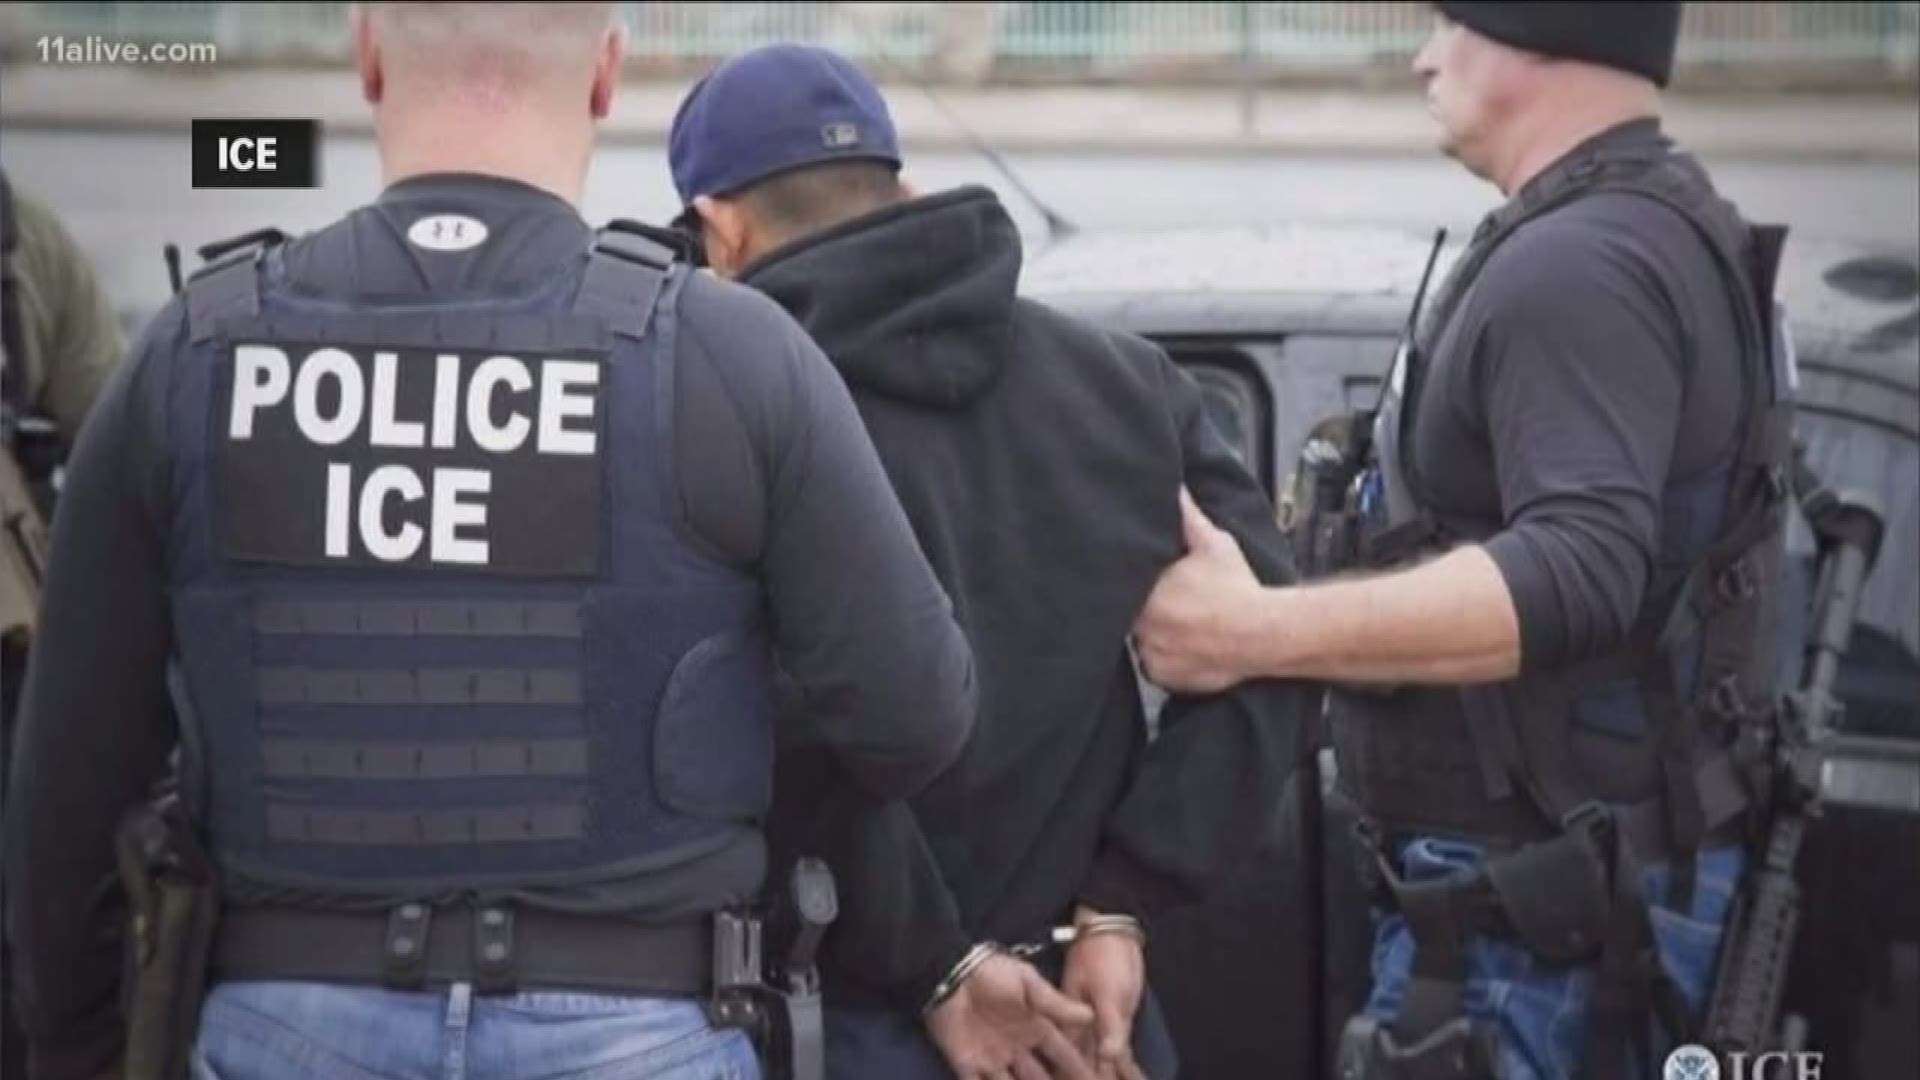 At least on Sunday, the day President Trump announced the raids would take place, Atlanta did not appear to be experiencing a major law enforcement operation by ICE.